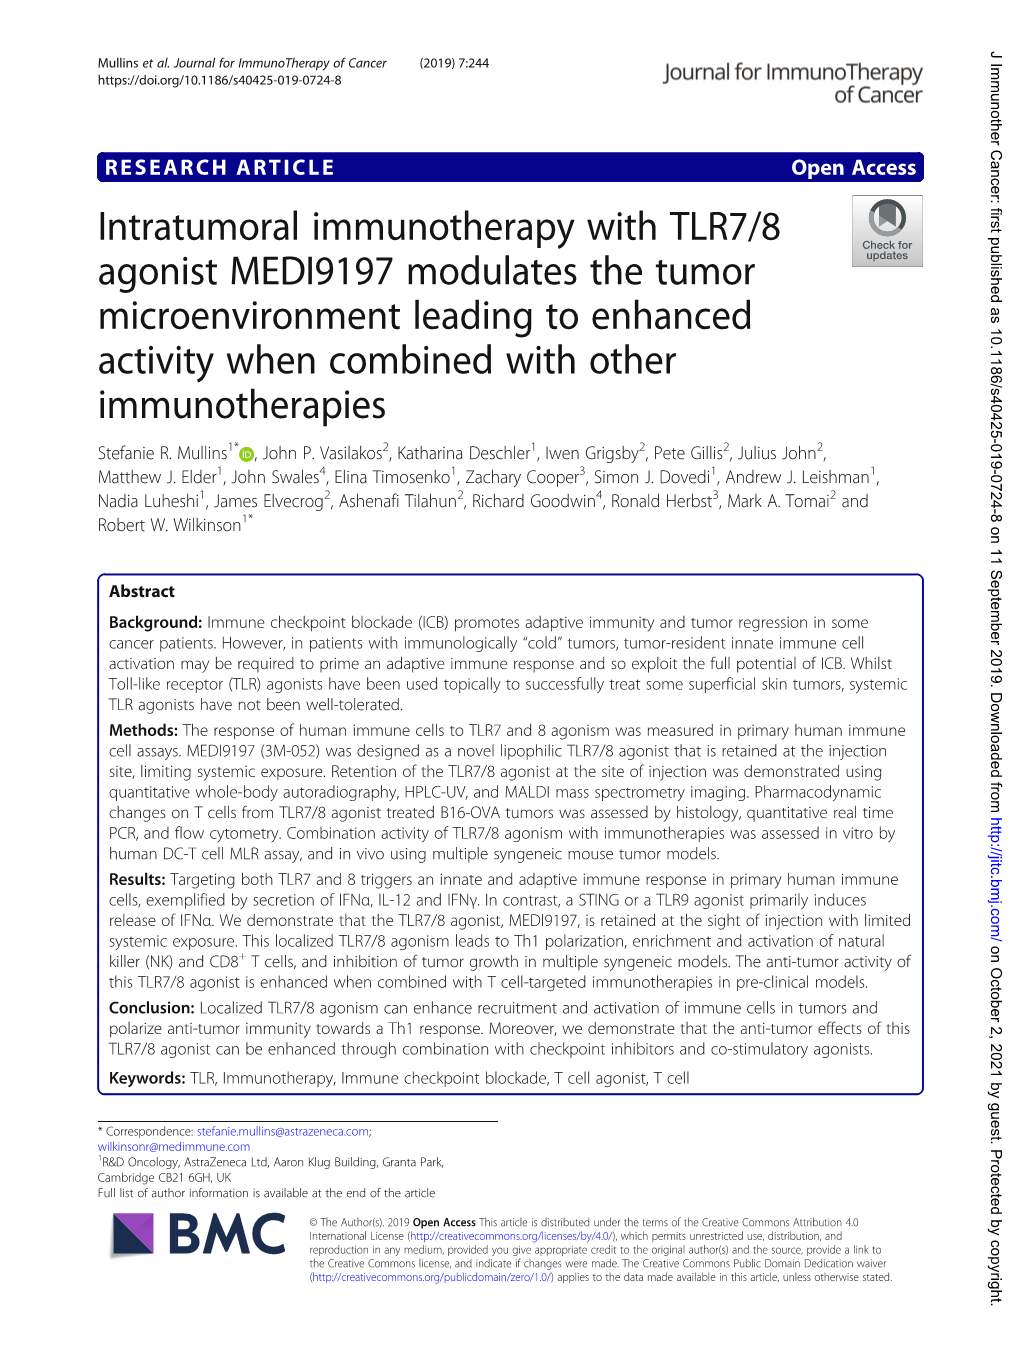 Intratumoral Immunotherapy with TLR7/8 Agonist MEDI9197